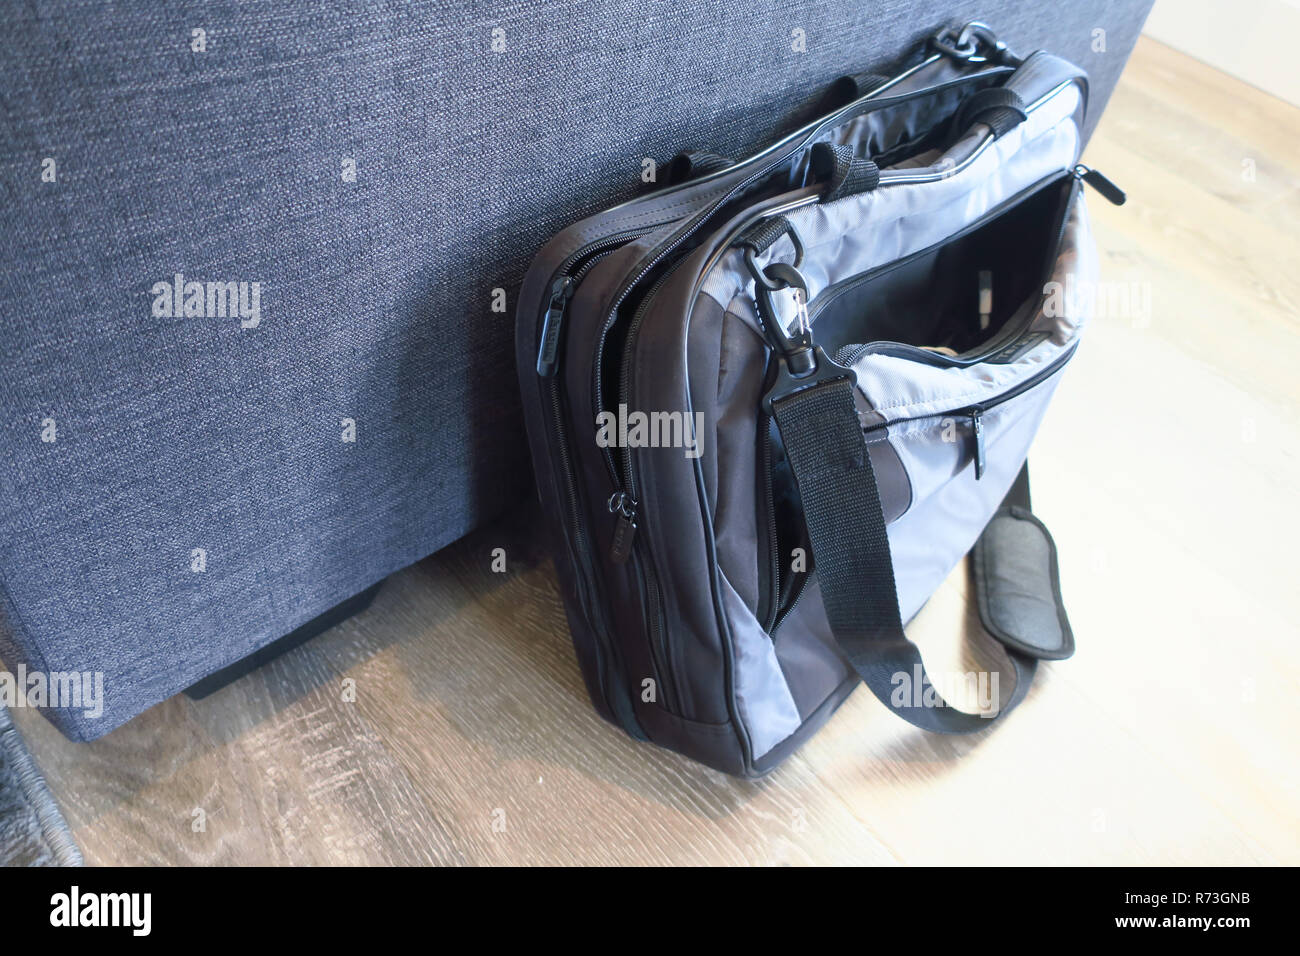 A laptop bag leaned up against a couch. Stock Photo